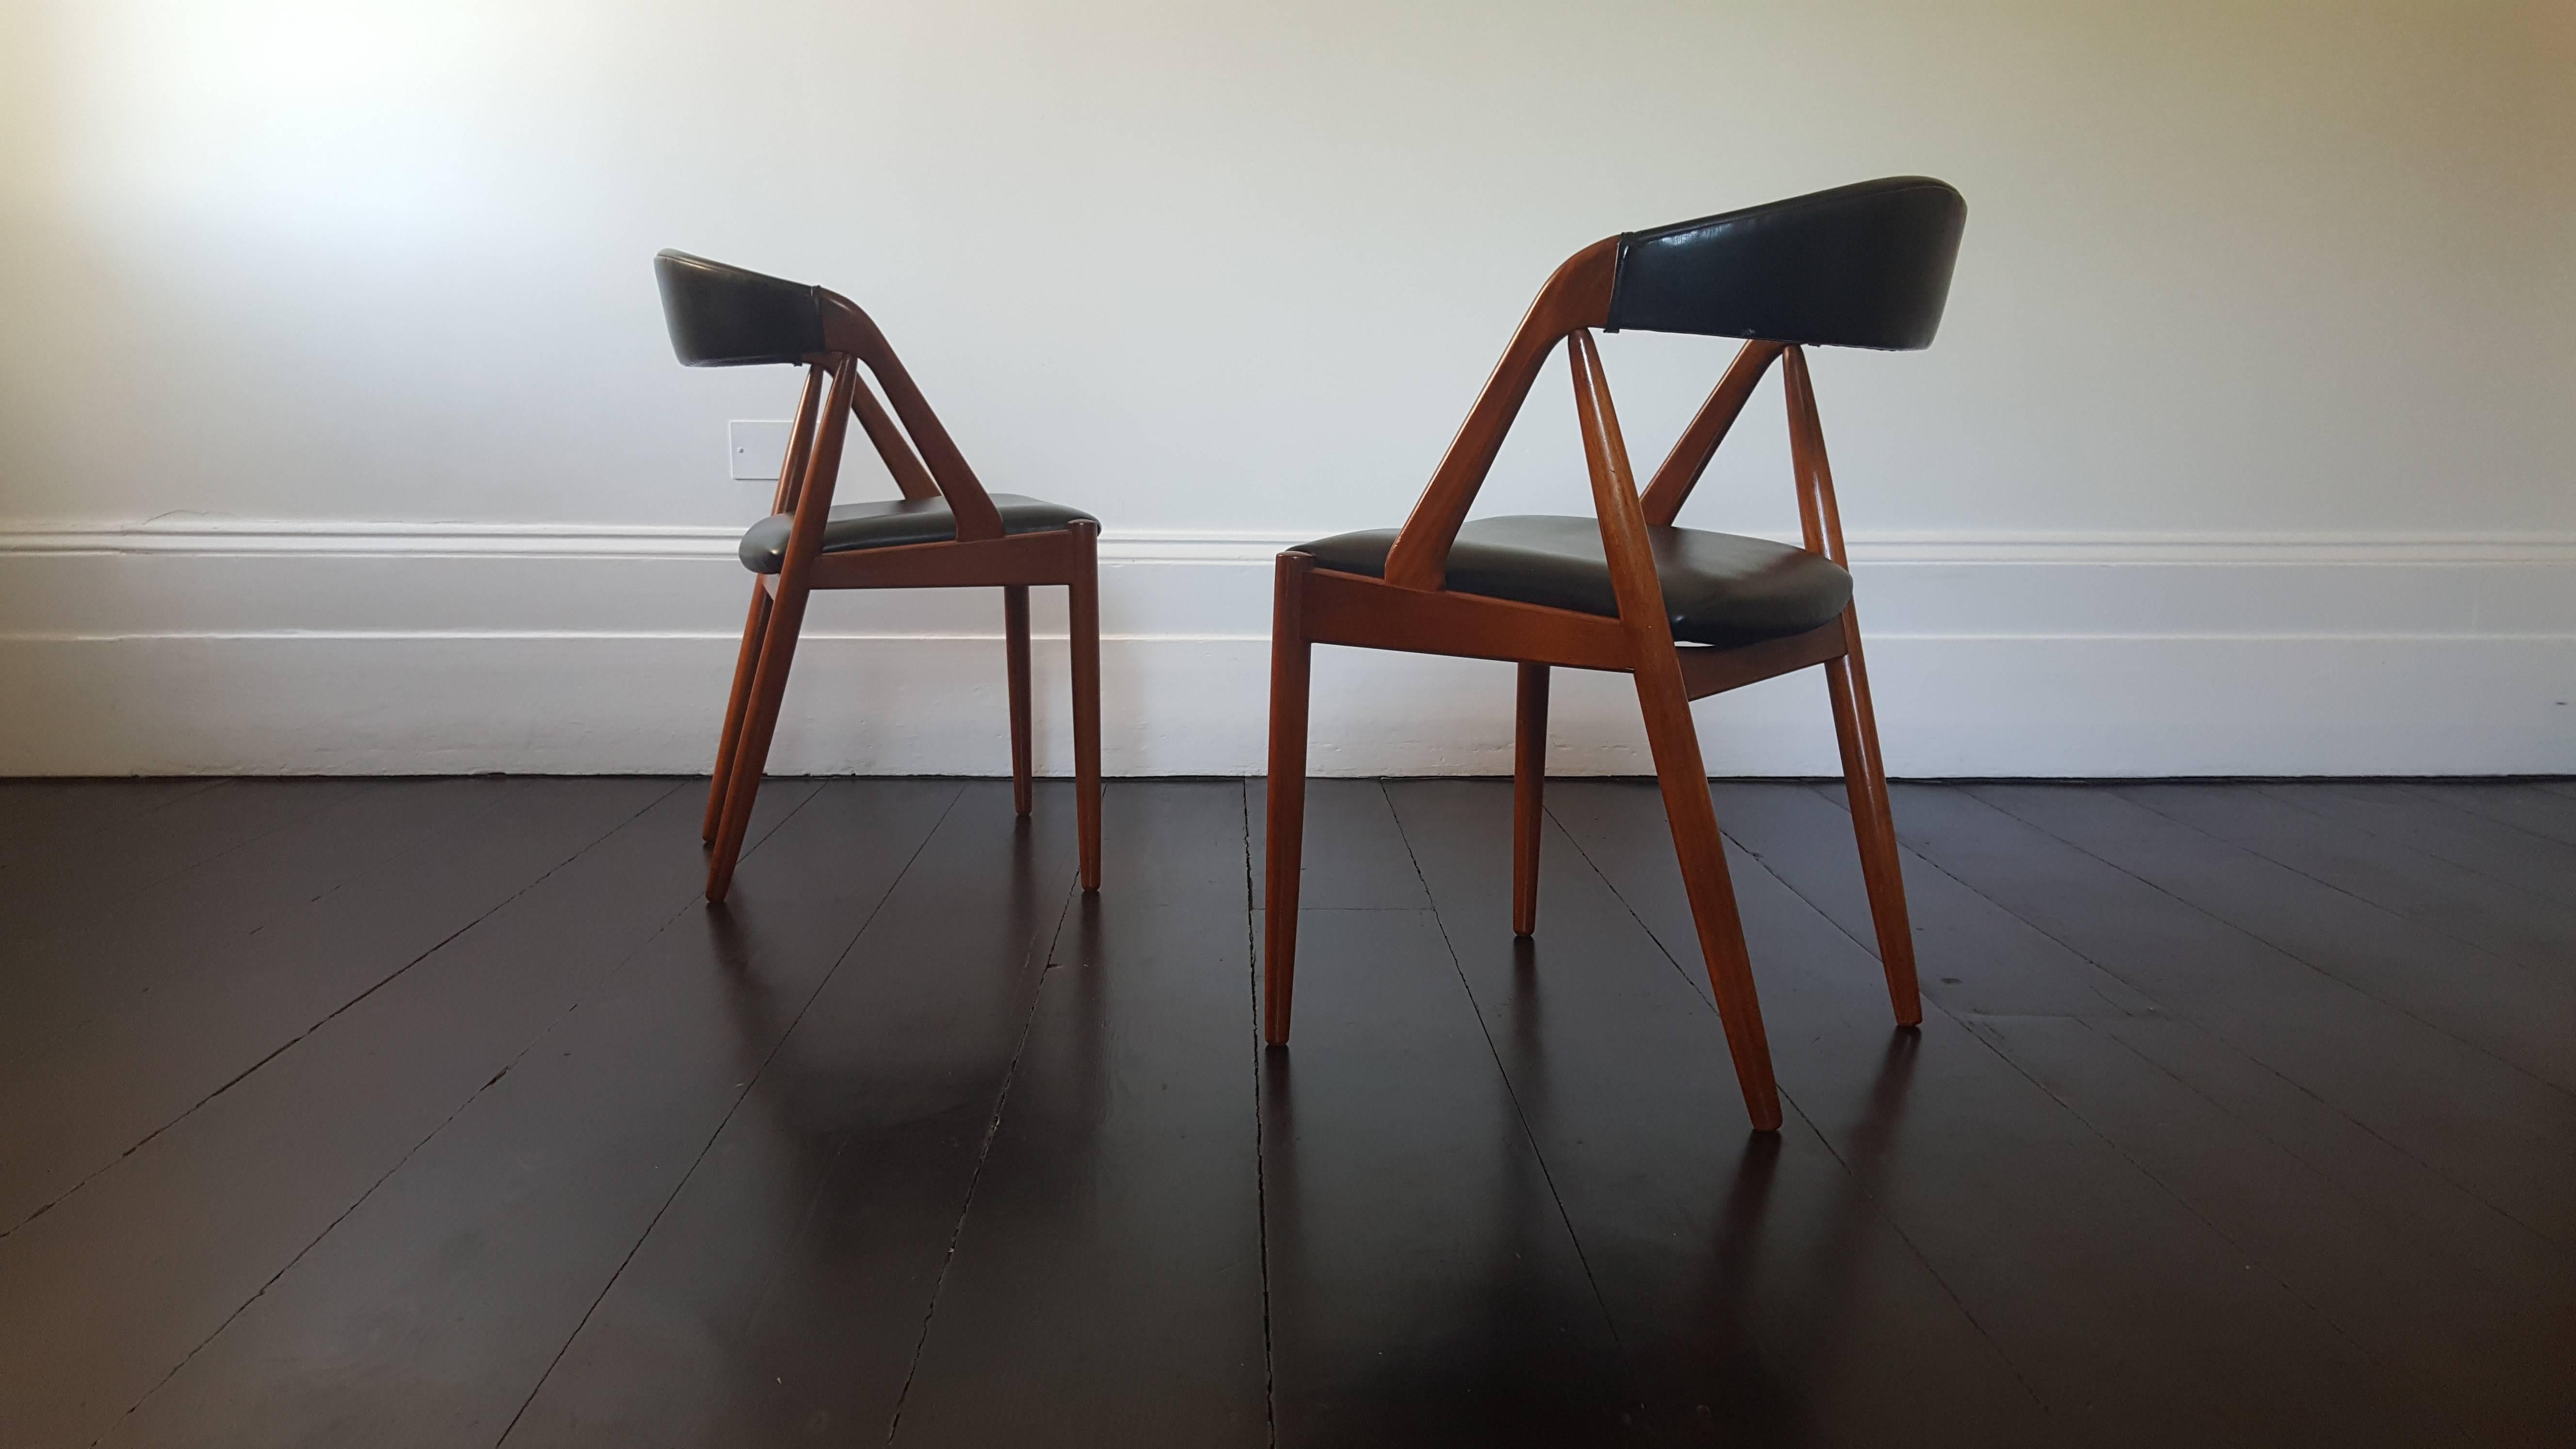 A pair of Kai Kristiansen model 31 teak 'A' frame dining chair for Schou Andersen, 1960s.

Amazing Kai Kristiansen model 31 teak 'A' frame dining chair for Schou Andersen 1960s, original faux black leather upholstery.

We provide very competitive